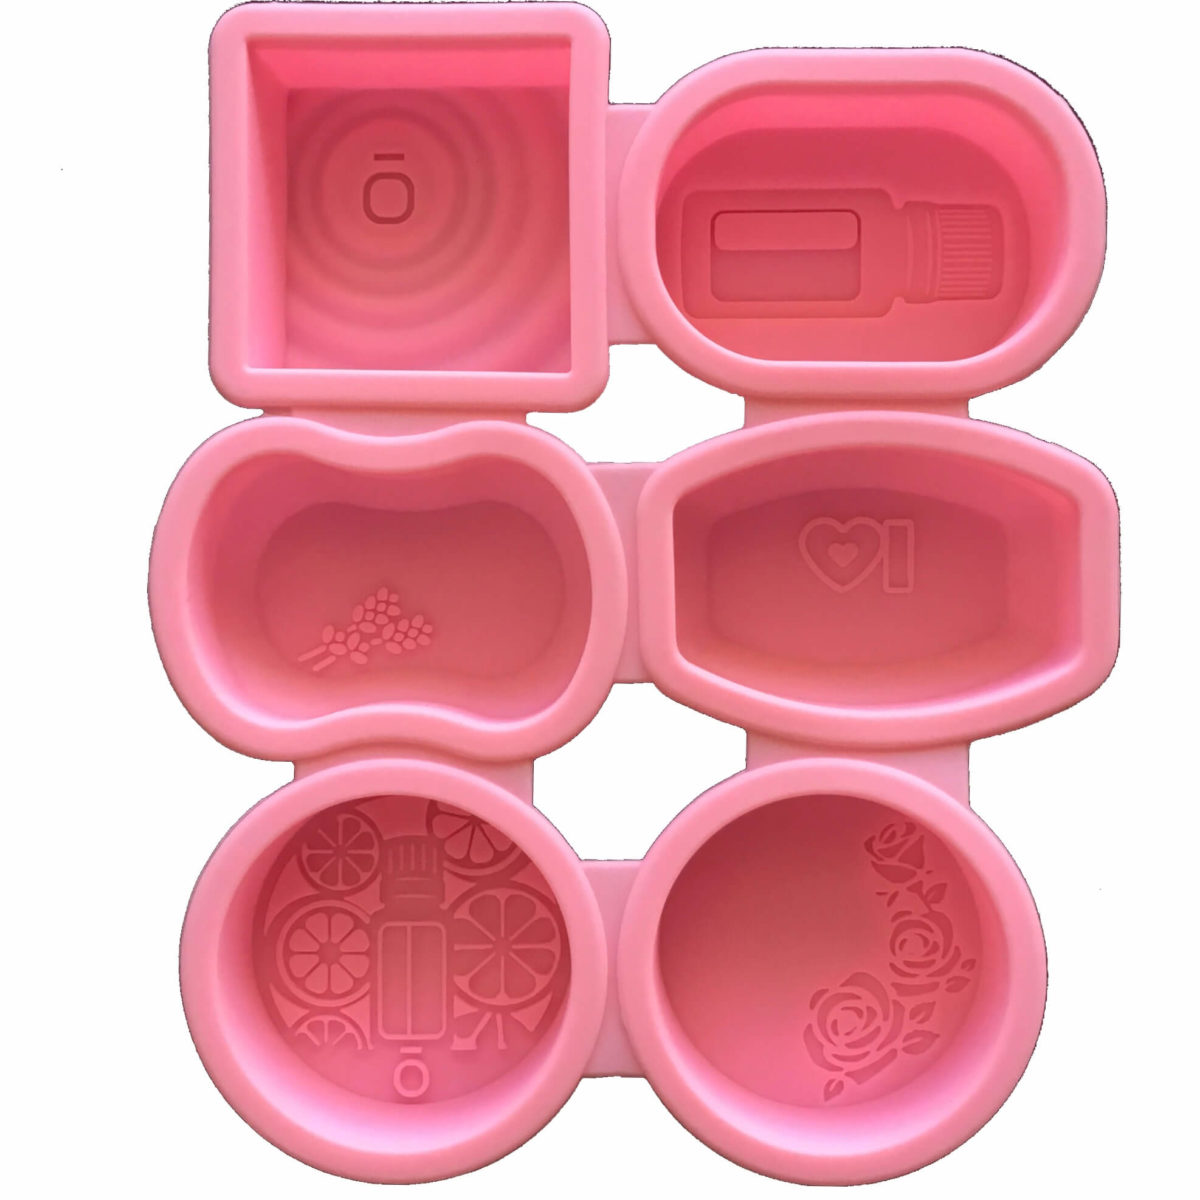 doterra essential oils six cavity pink silicone mould with six different cavity designs with an essential oil theme showing individual mould cavity details